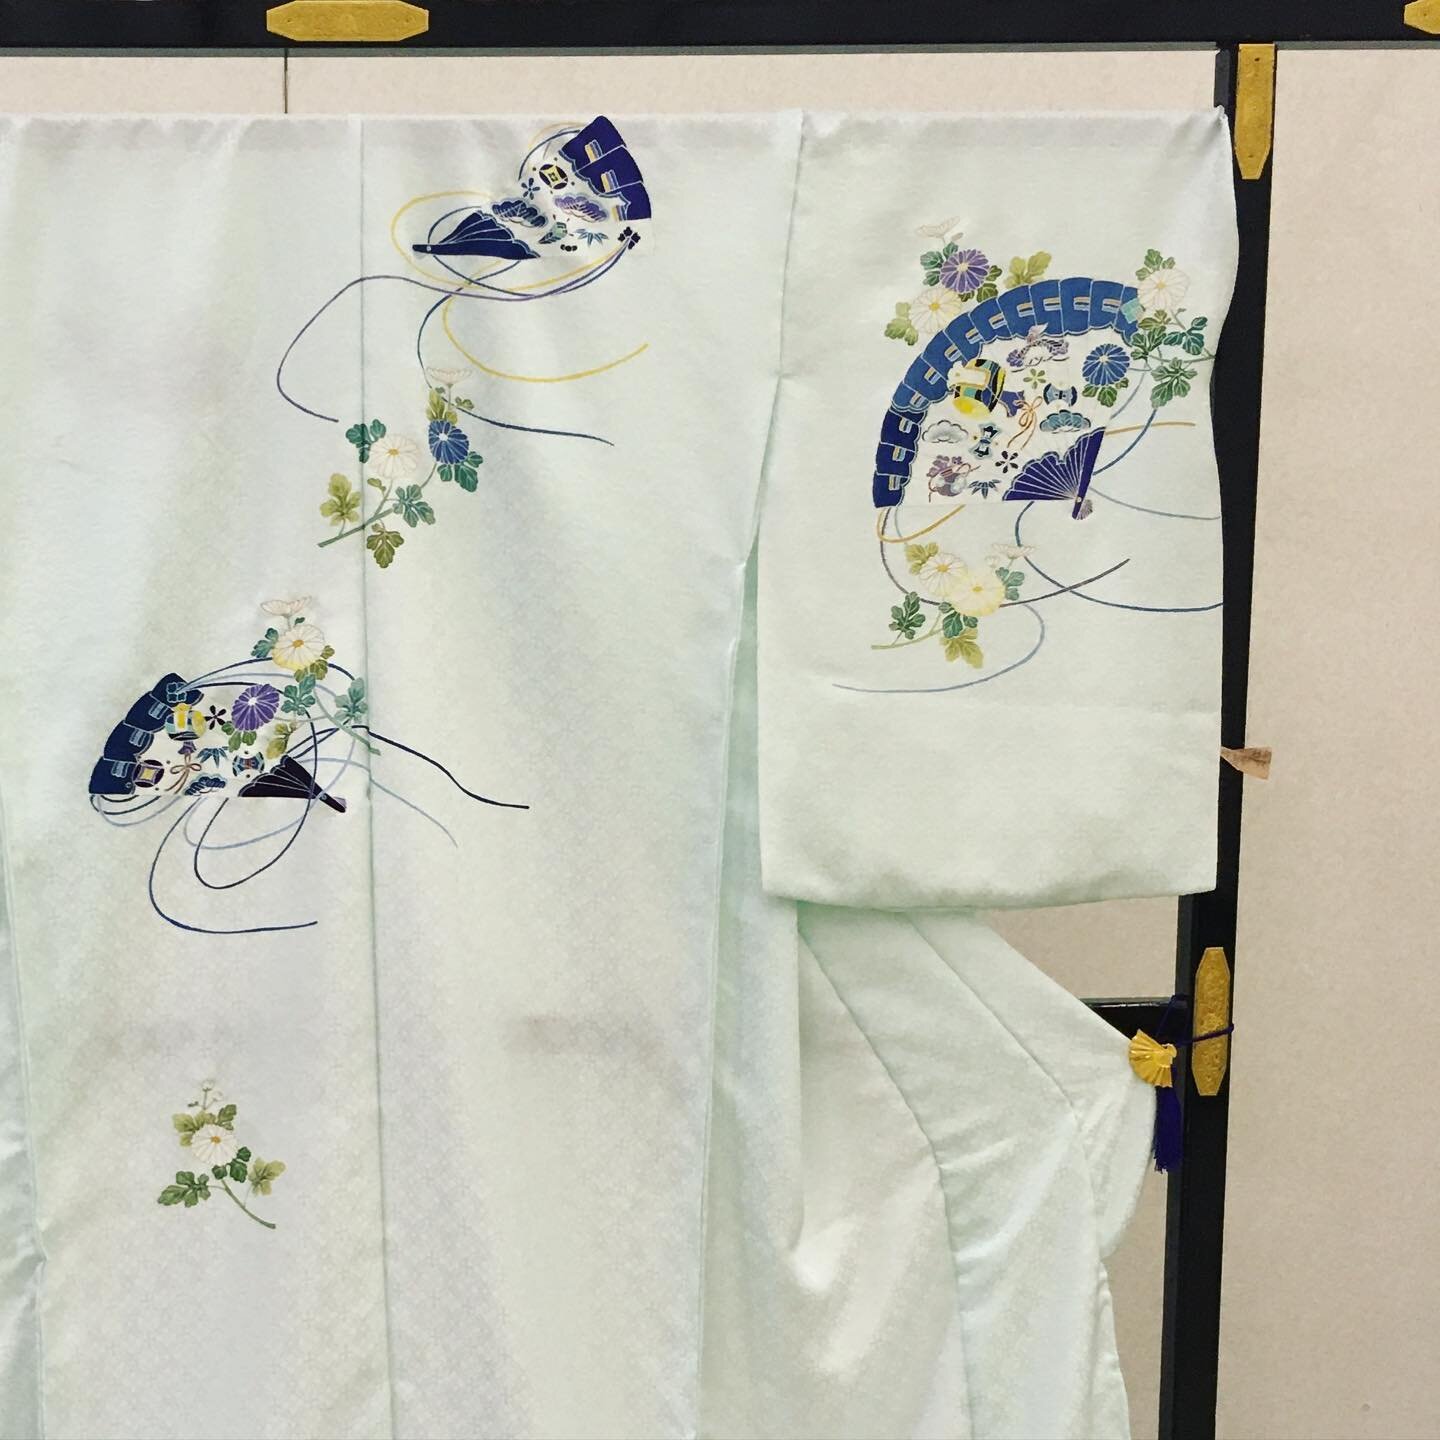 My sister&rsquo;s award-winning yu-zen kimono is exhibited in Miyako Messe Exhibition Centre in #kyoto . Her works are created by 100 percent hand drawing with exclusively traditional techniques developed in Kyoto throughout the history of Kimono. Co